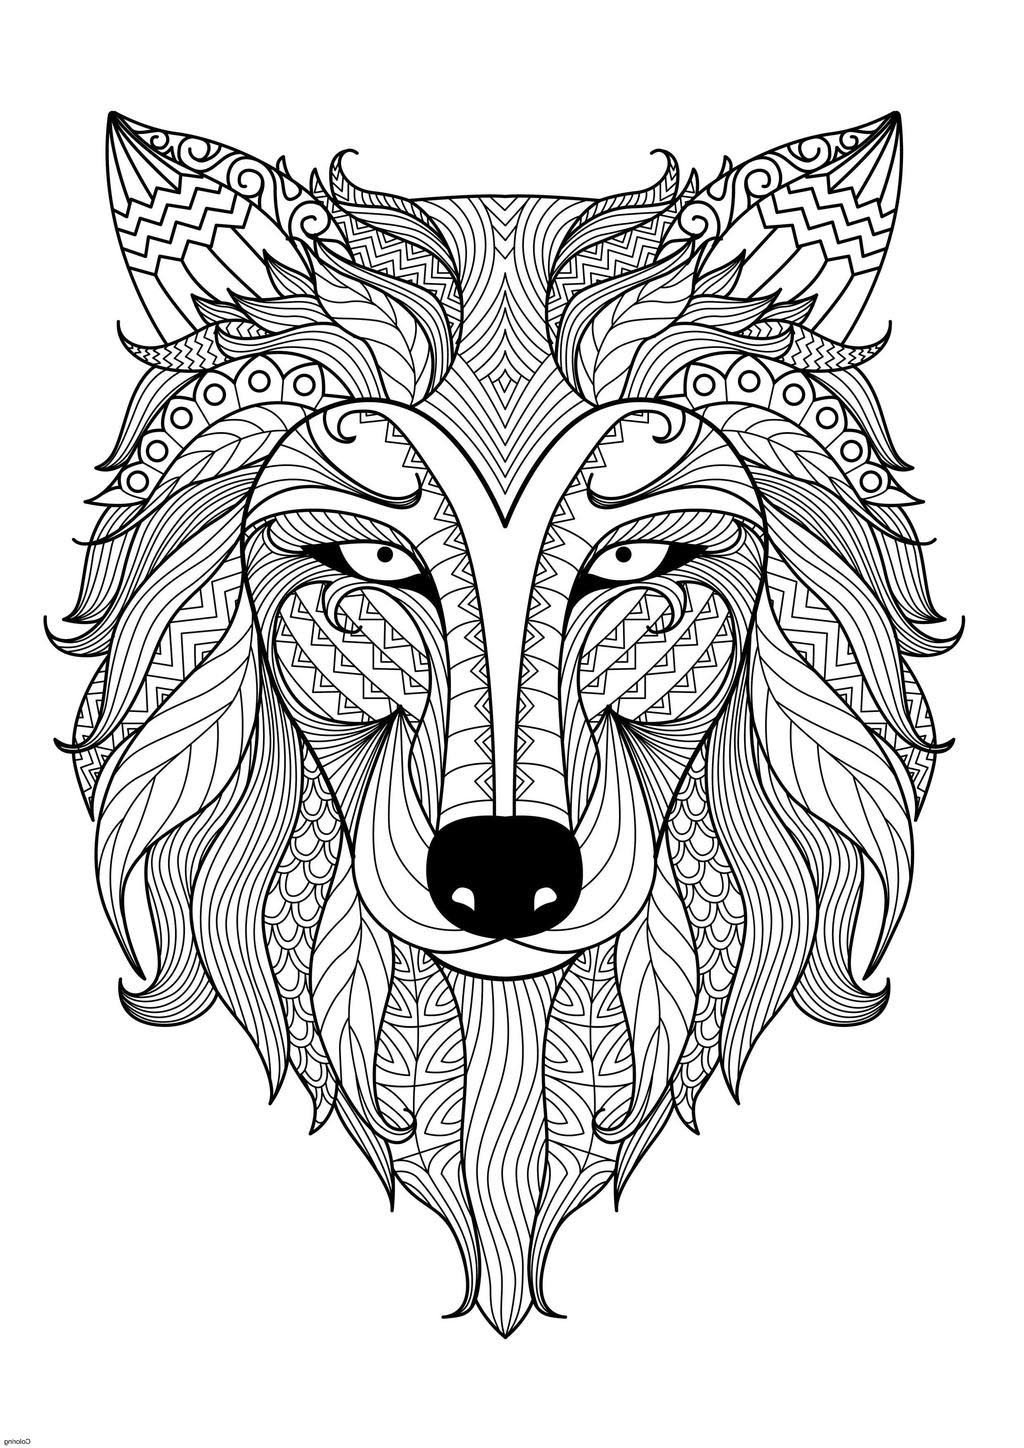 Mandala Coloring Pages Free Online Coloring Pages Printable Mandala Coloring Pages For Adults Roblox